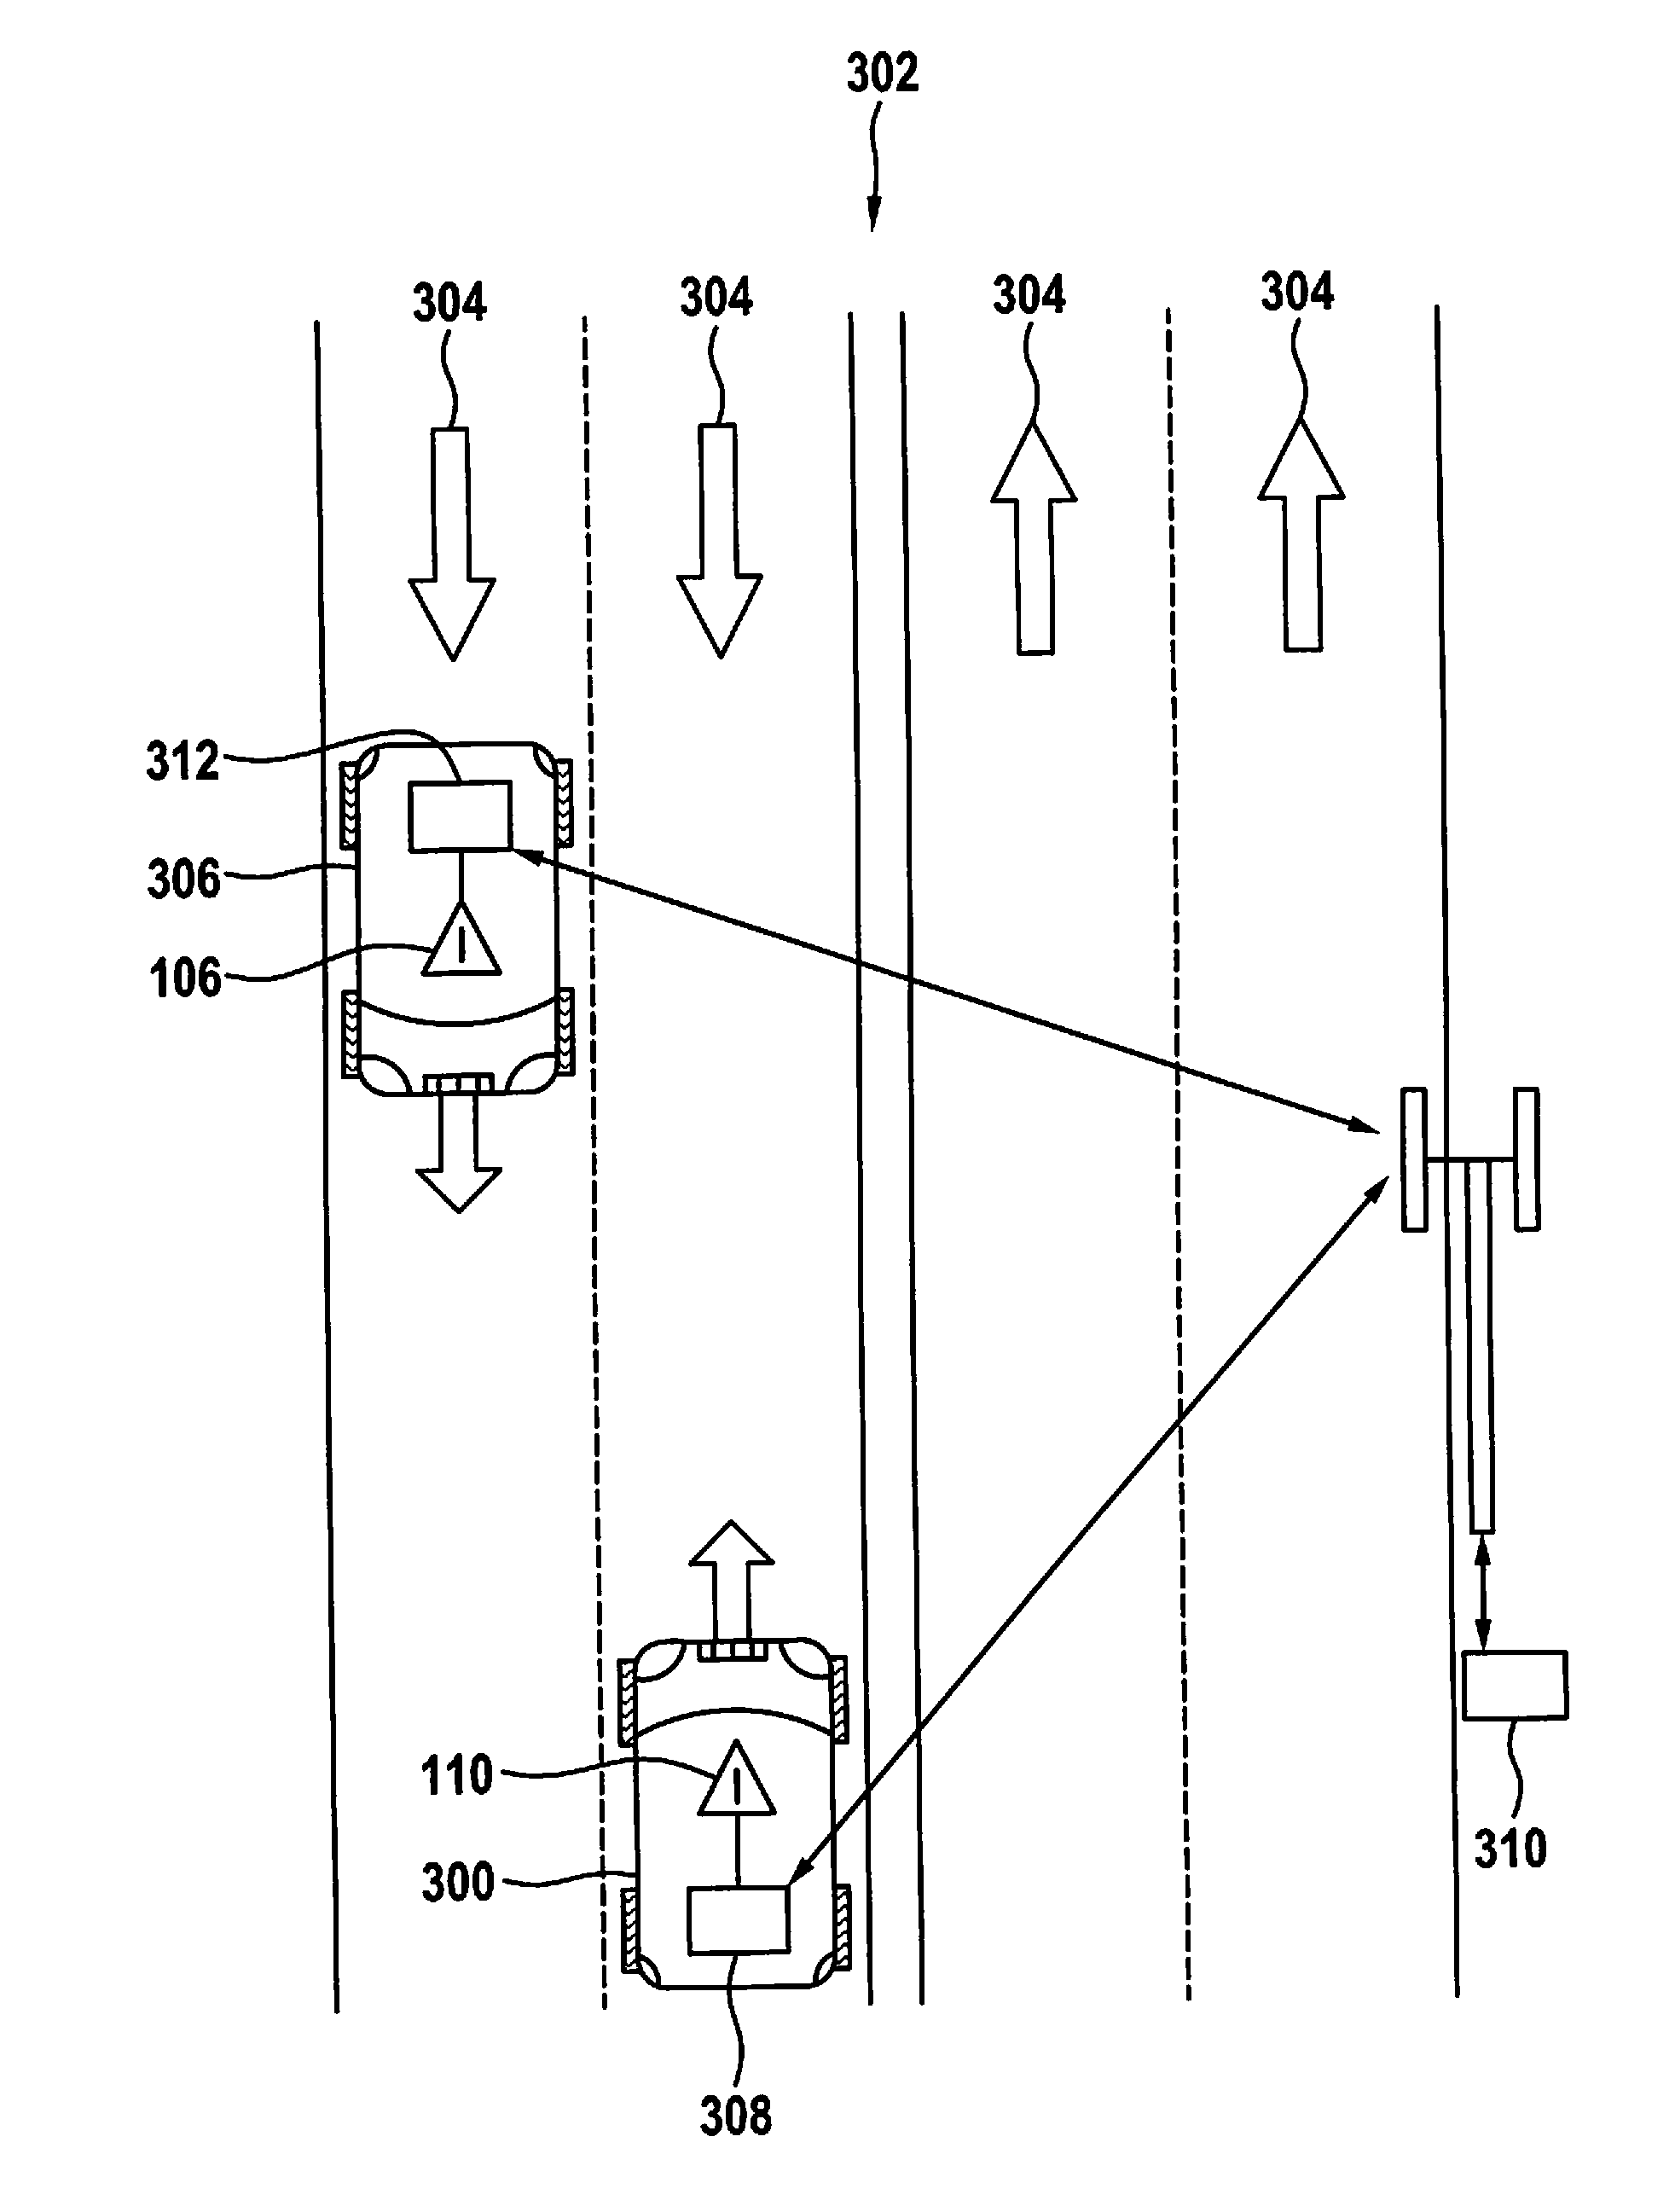 Method and apparatus to warn of a vehicle moving in the wrong direction of travel